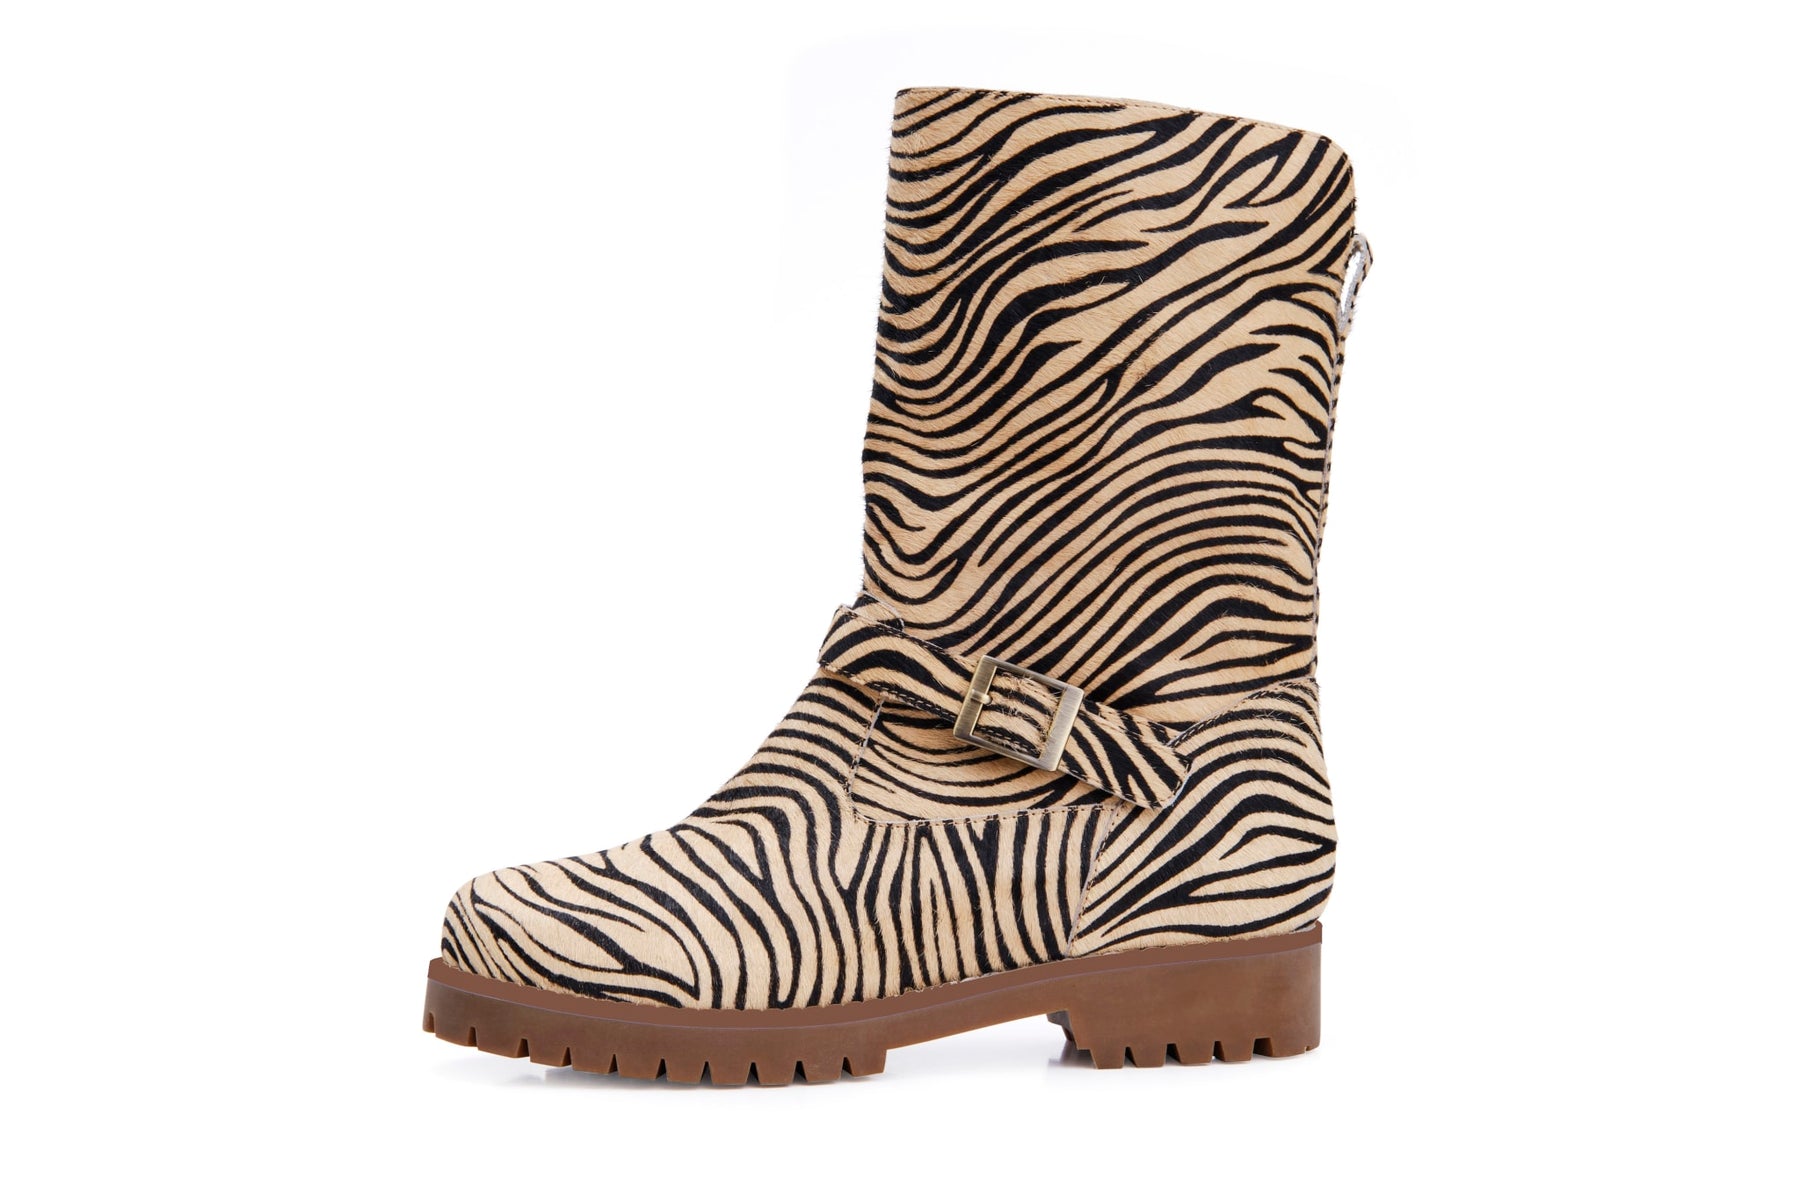 Shelly entice Winter boots profile